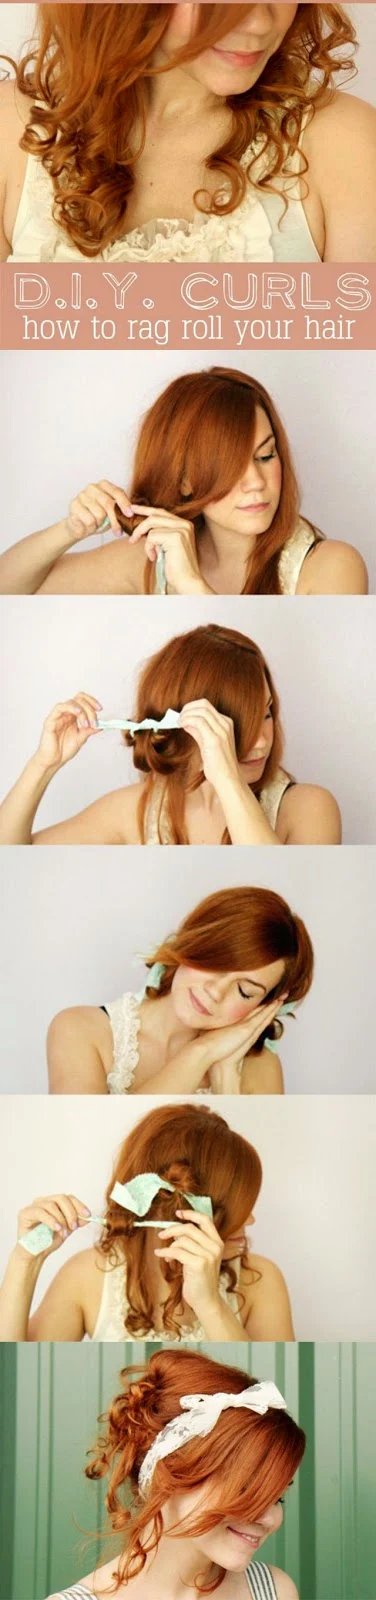 D.I.Y. CURLS: HOW TO RAG ROLL YOUR HAIR